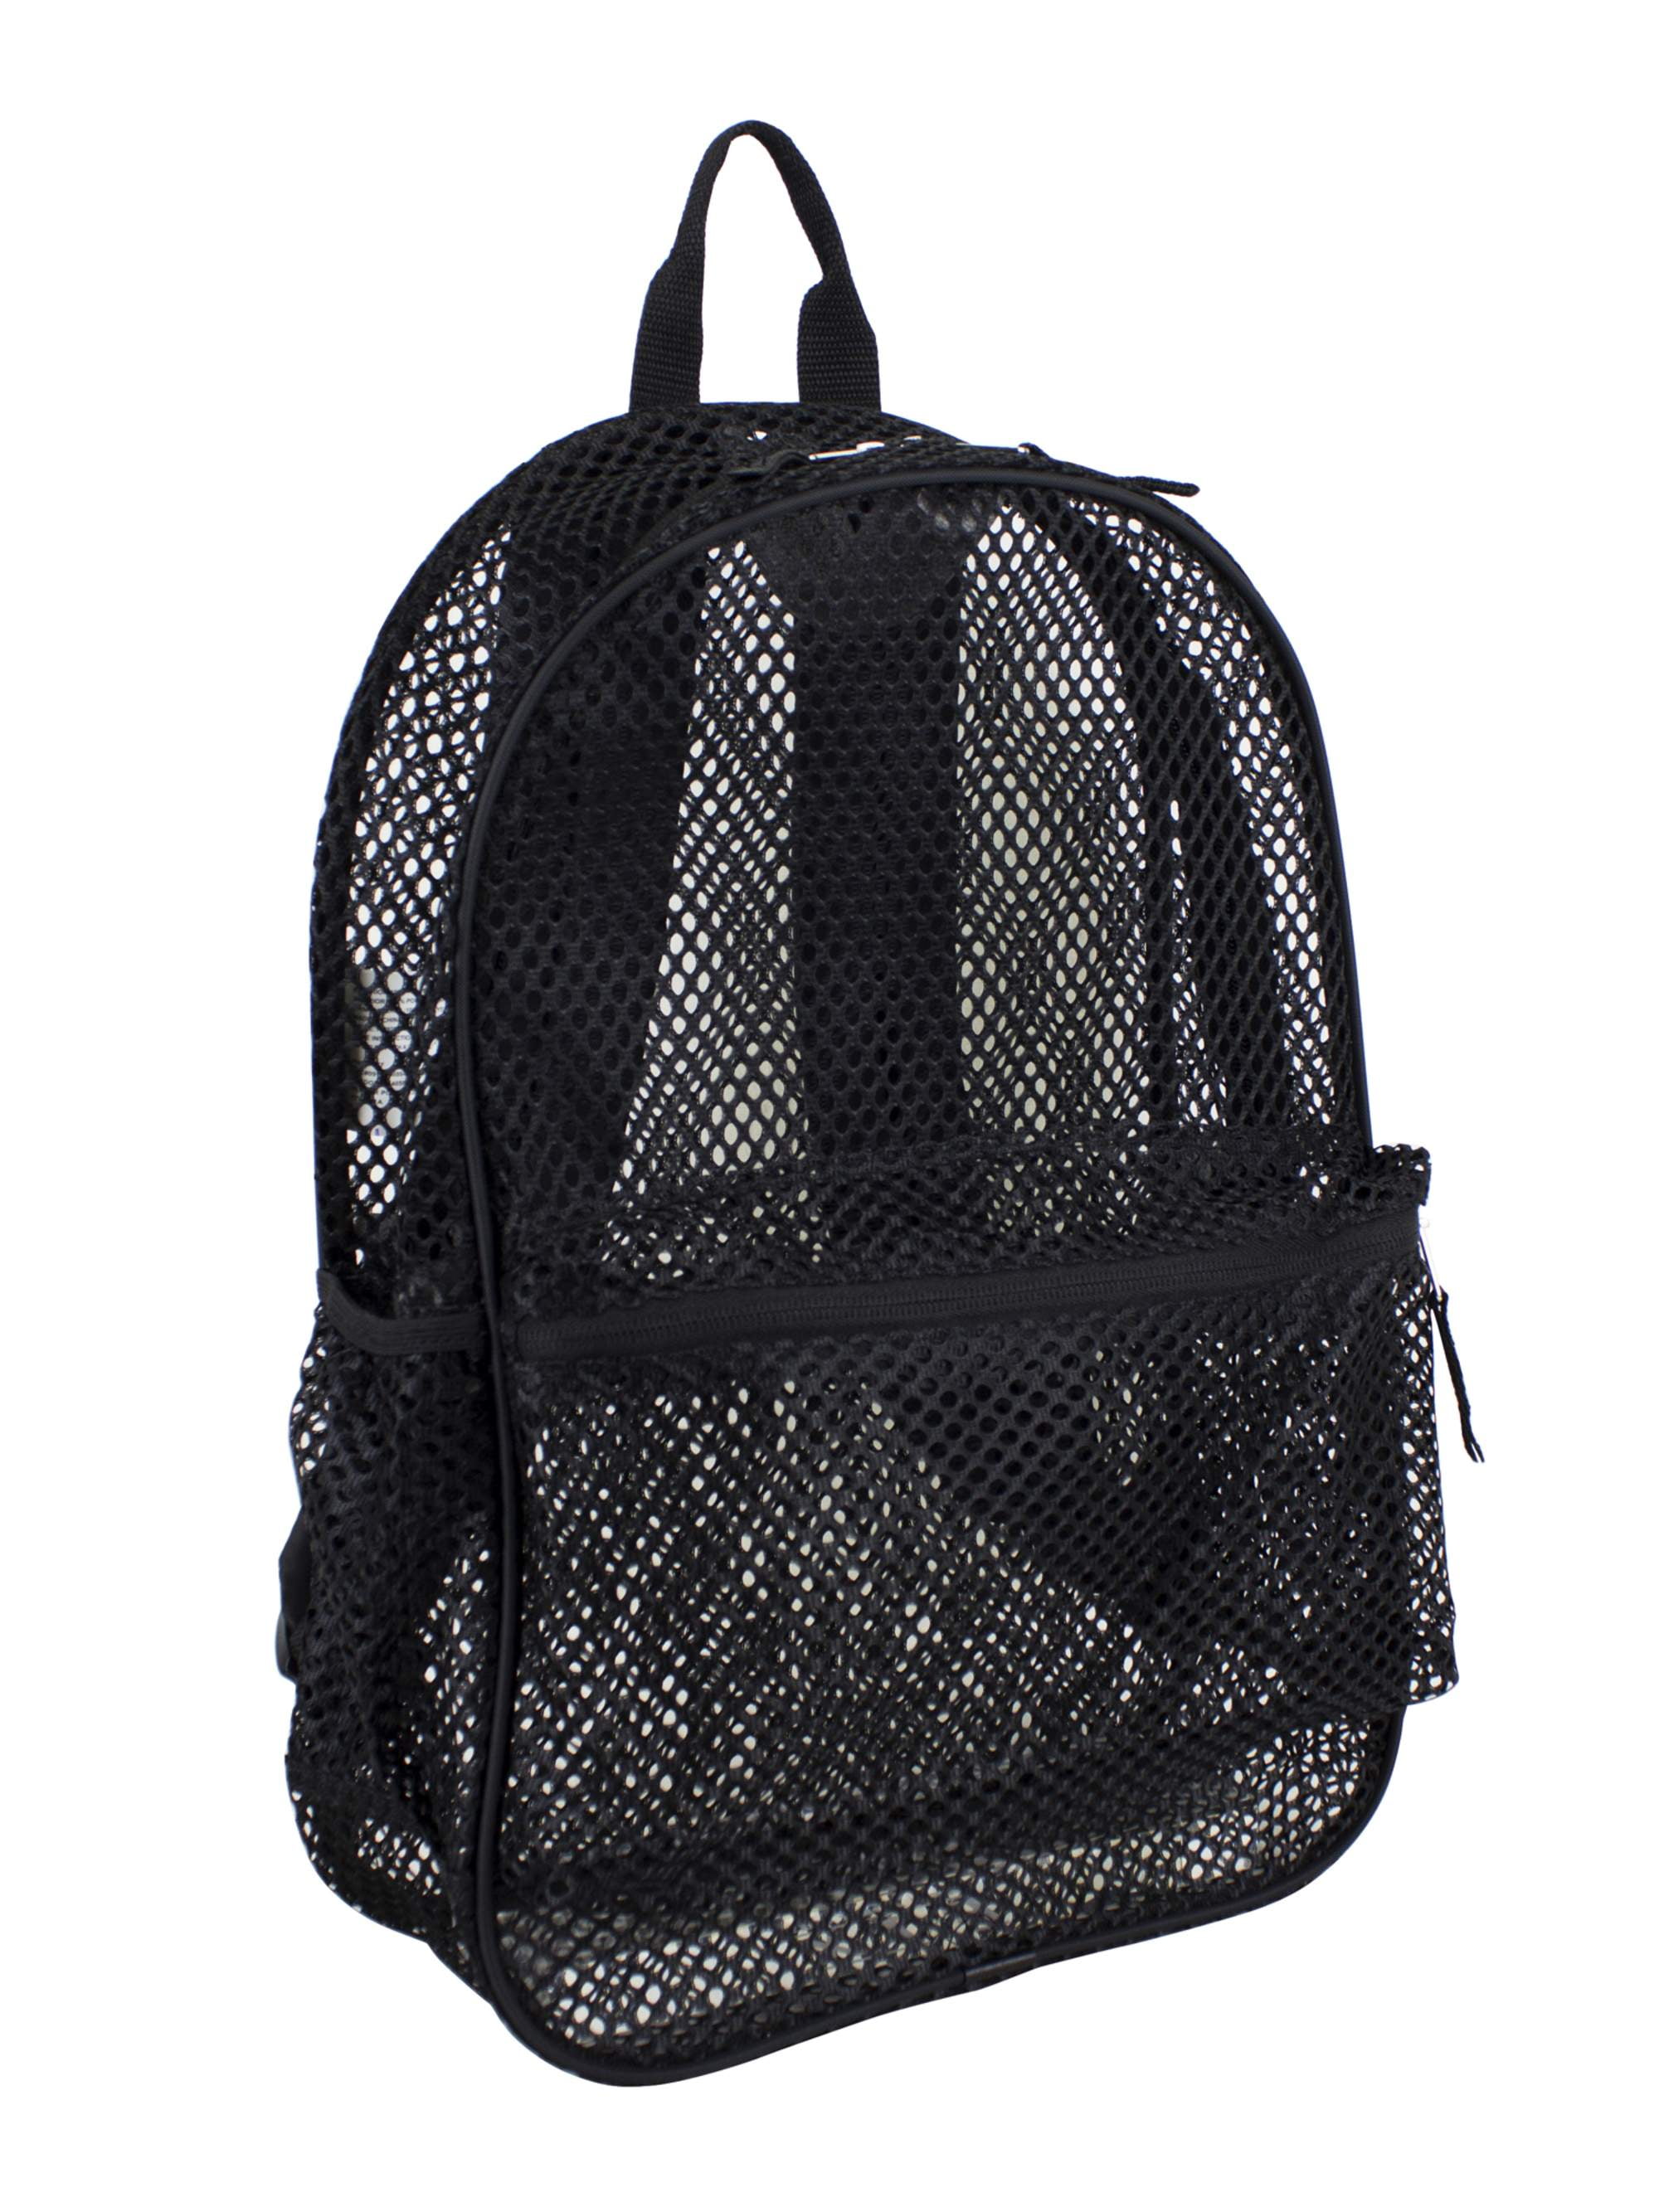 Eastsport - Mesh Backpack with Padded Adjustable Straps - www.waterandnature.org - www.waterandnature.org